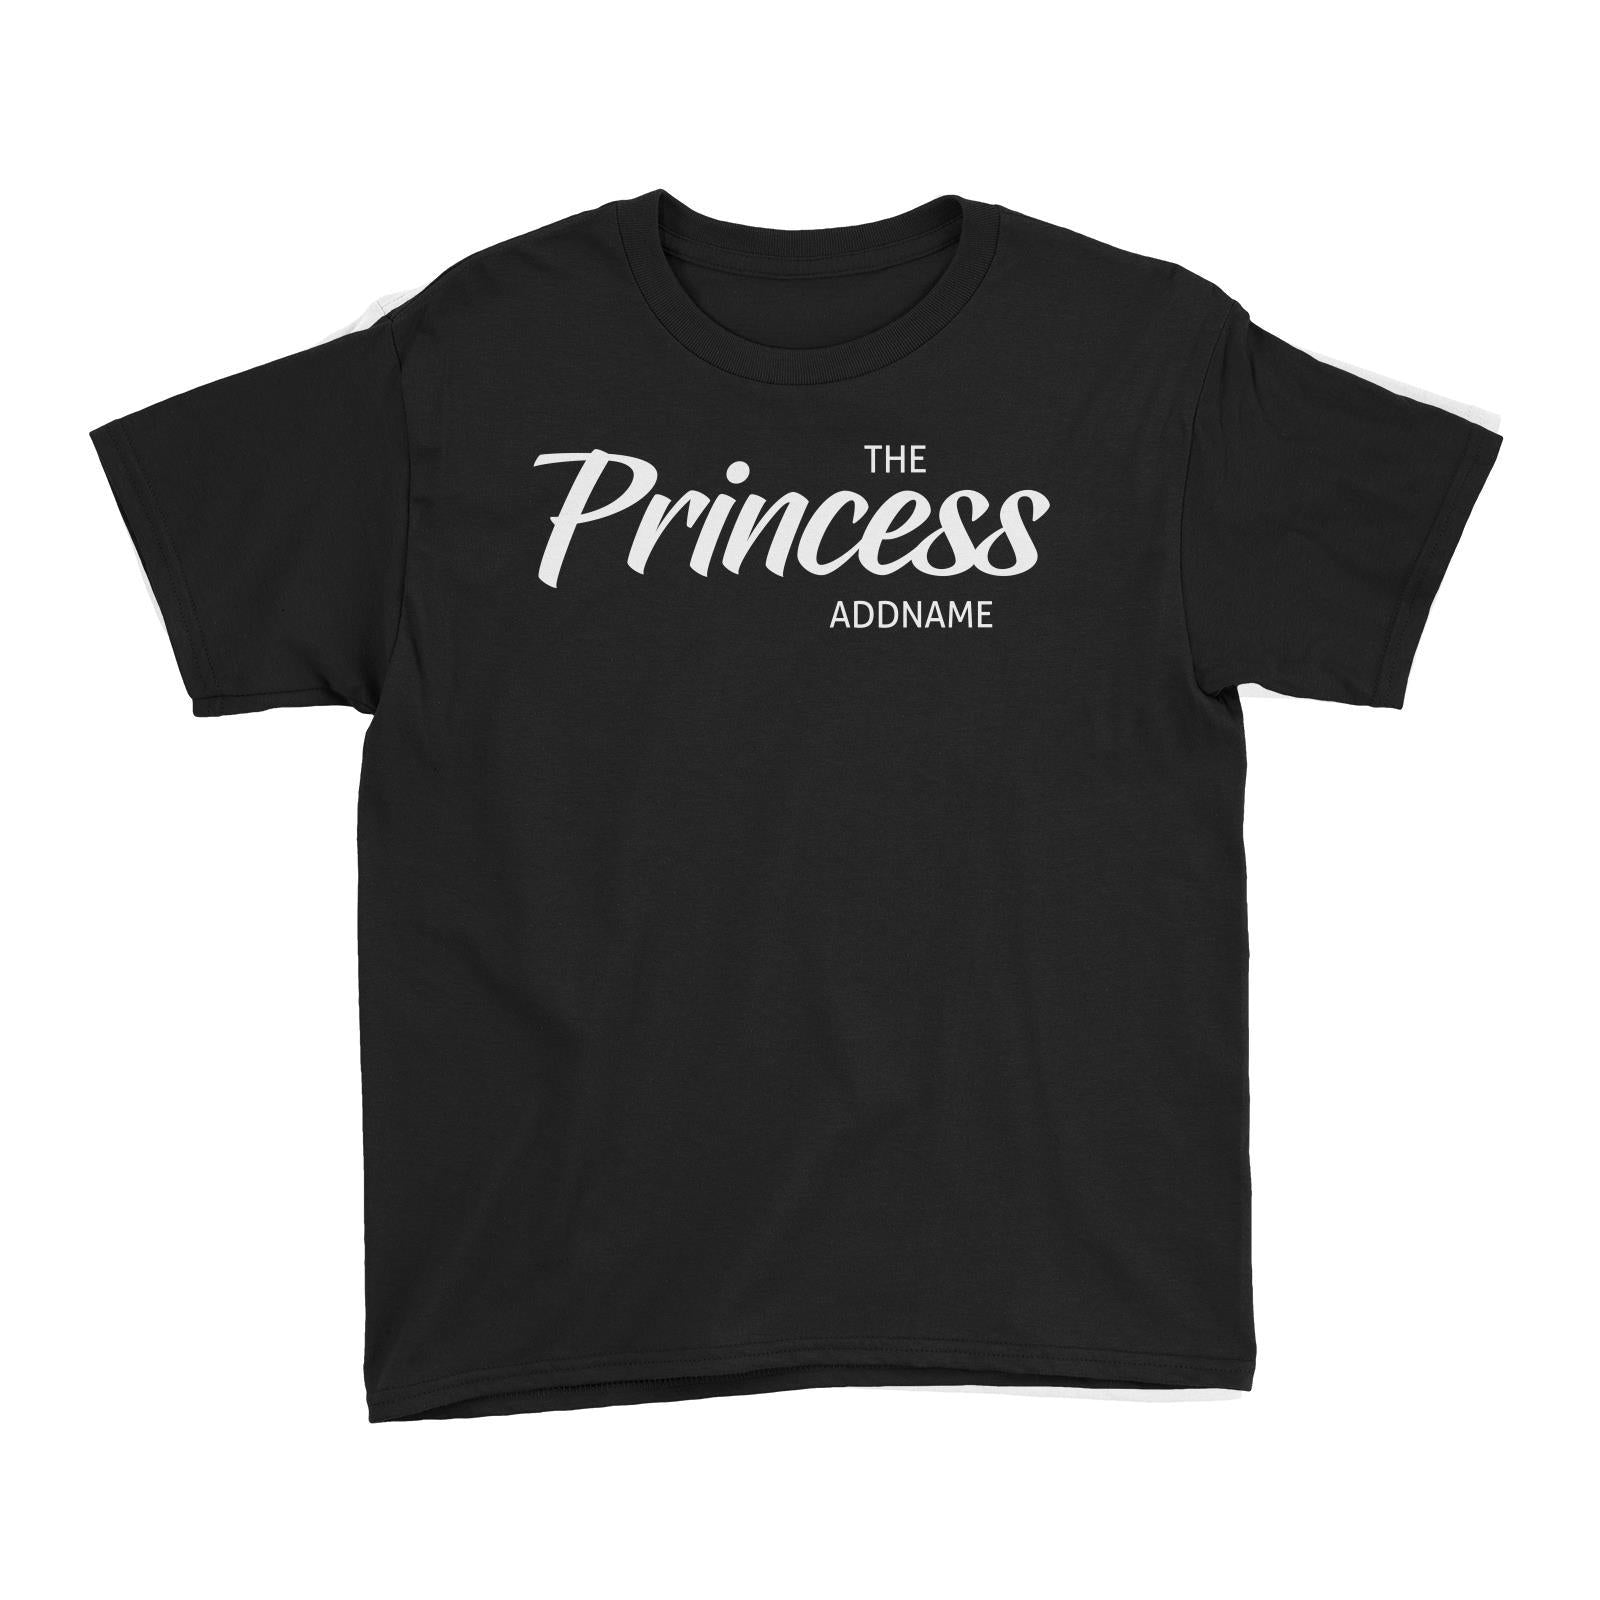 The Princess Addname Kid's T-Shirt Personalizable Designs Matching Family Royal Family Edition Royal Simple